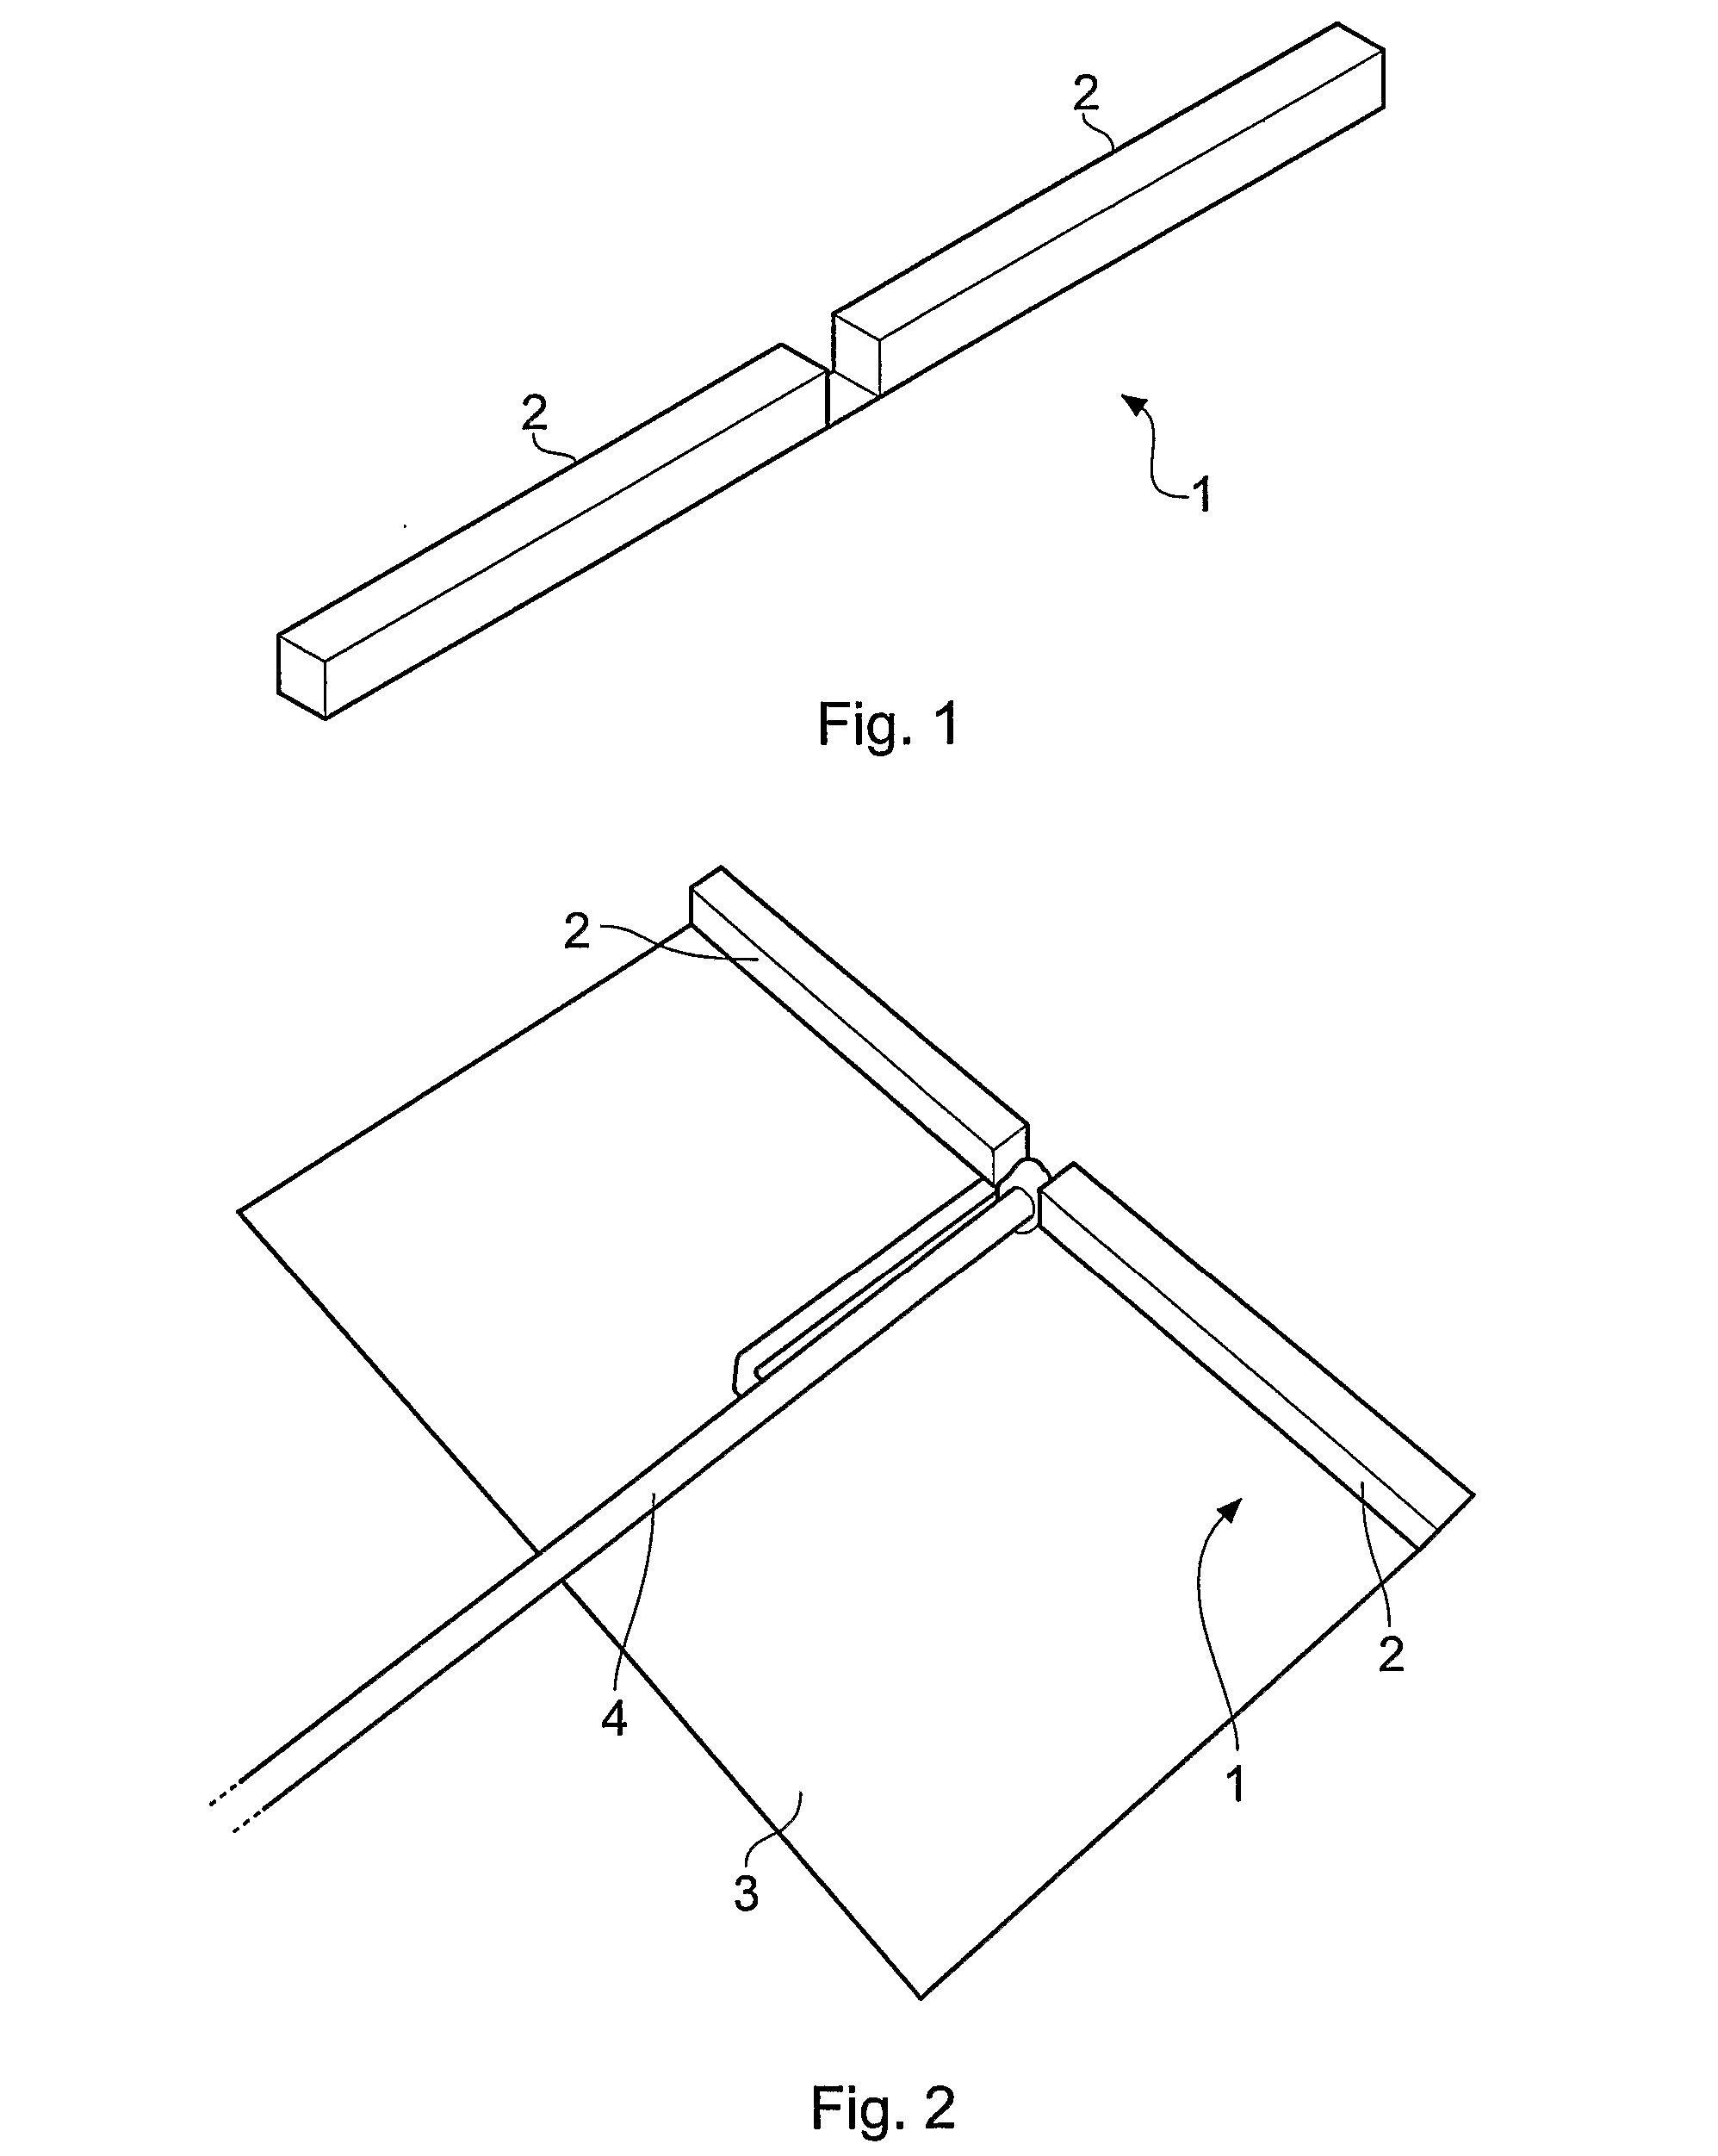 Pure Dielectric Antennas and Related Devices